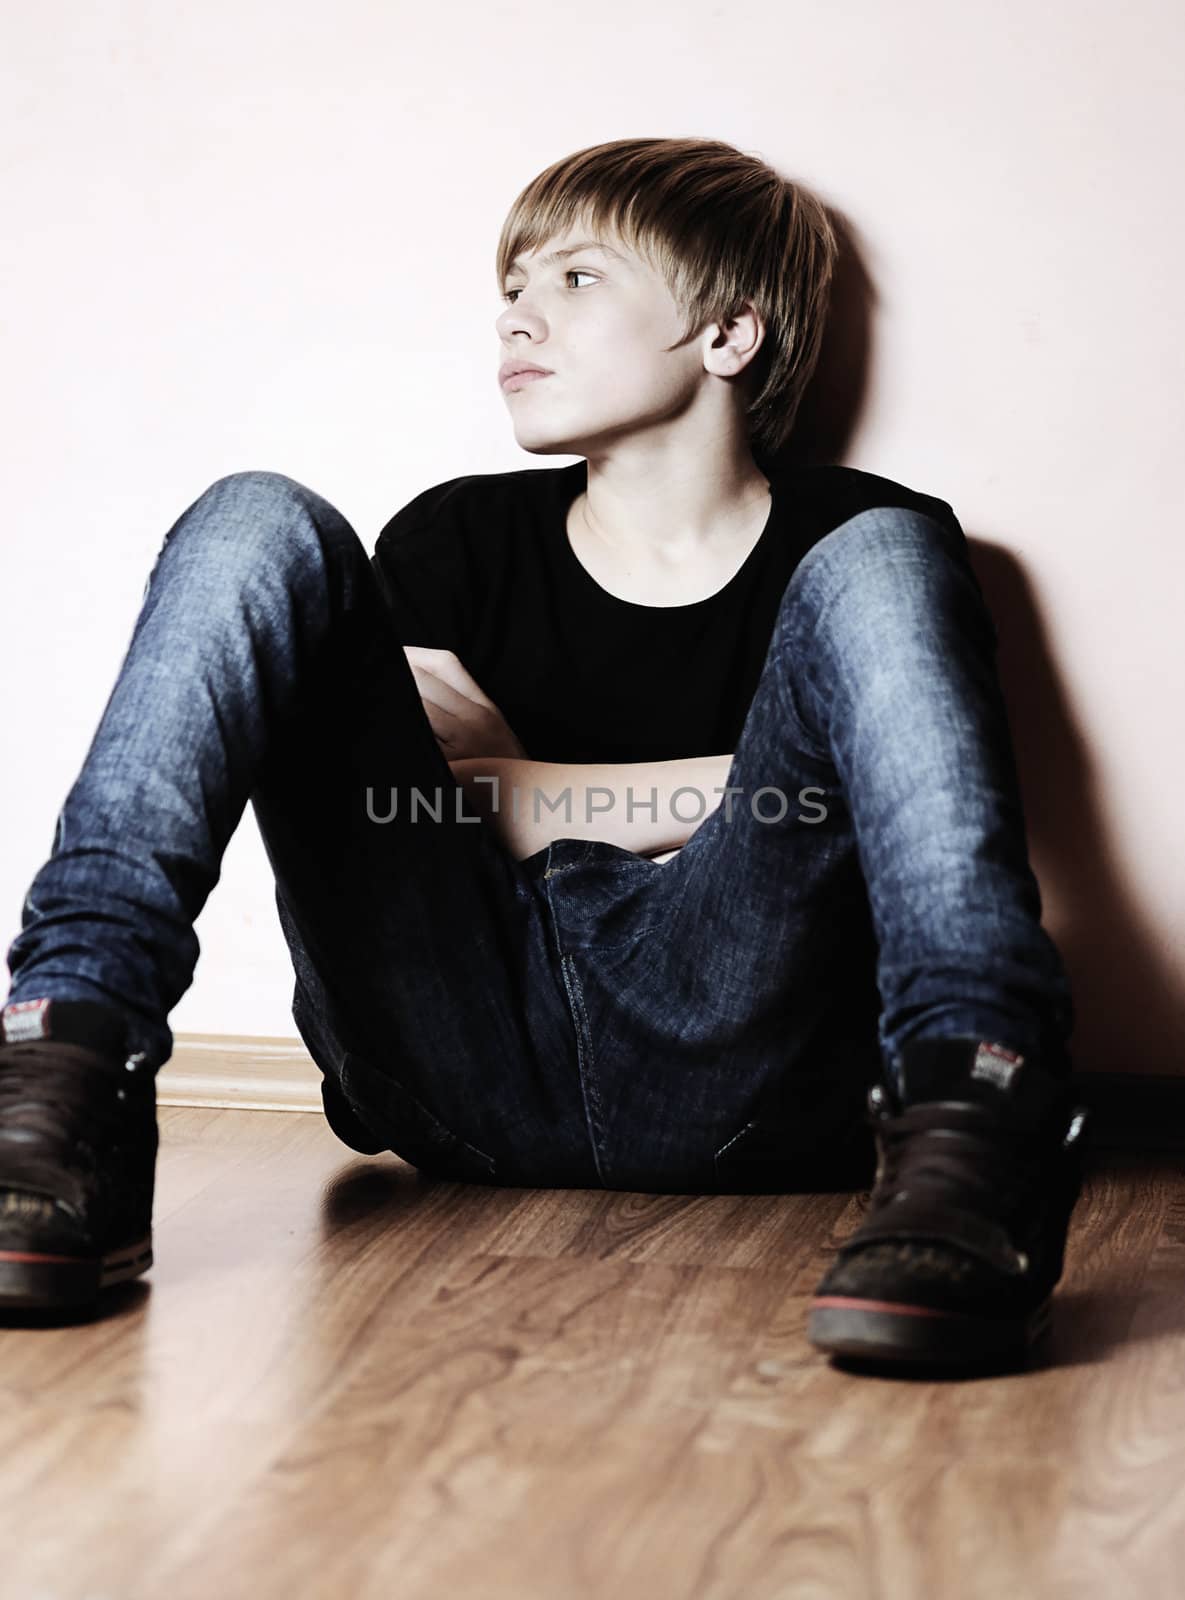 The teenager in a black vest sits about a wall